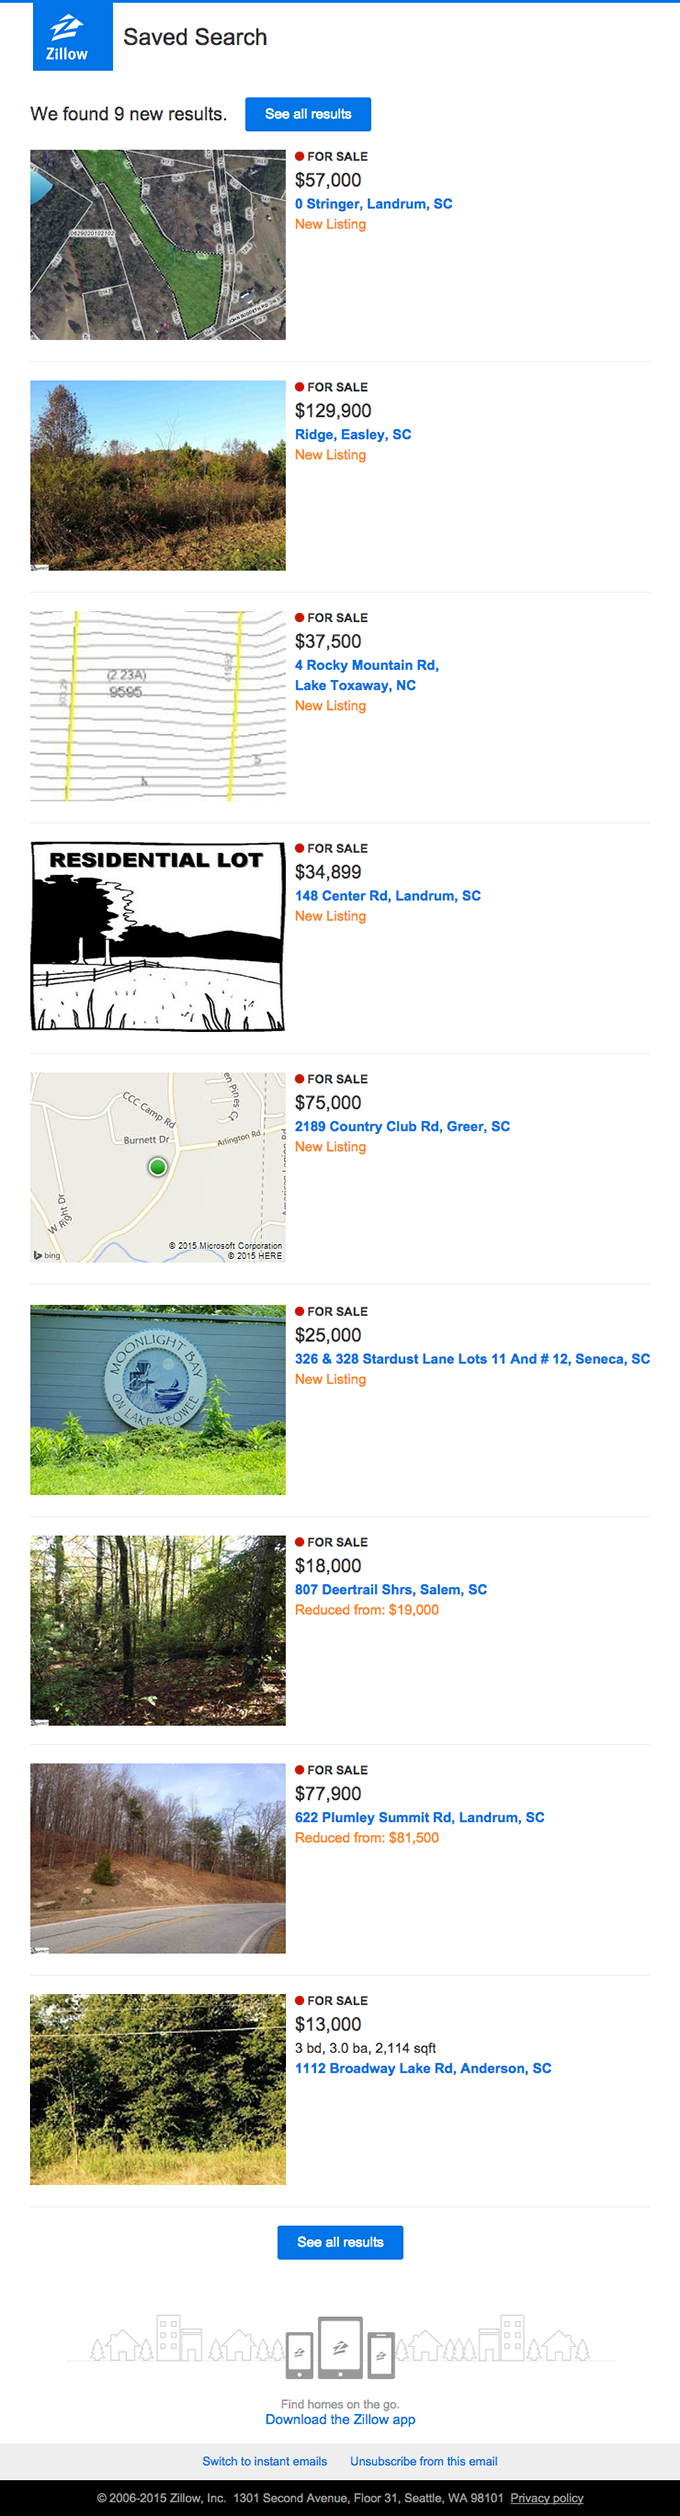 9 Results – Your For Sale, Potential Listings near Easley 29640 Search